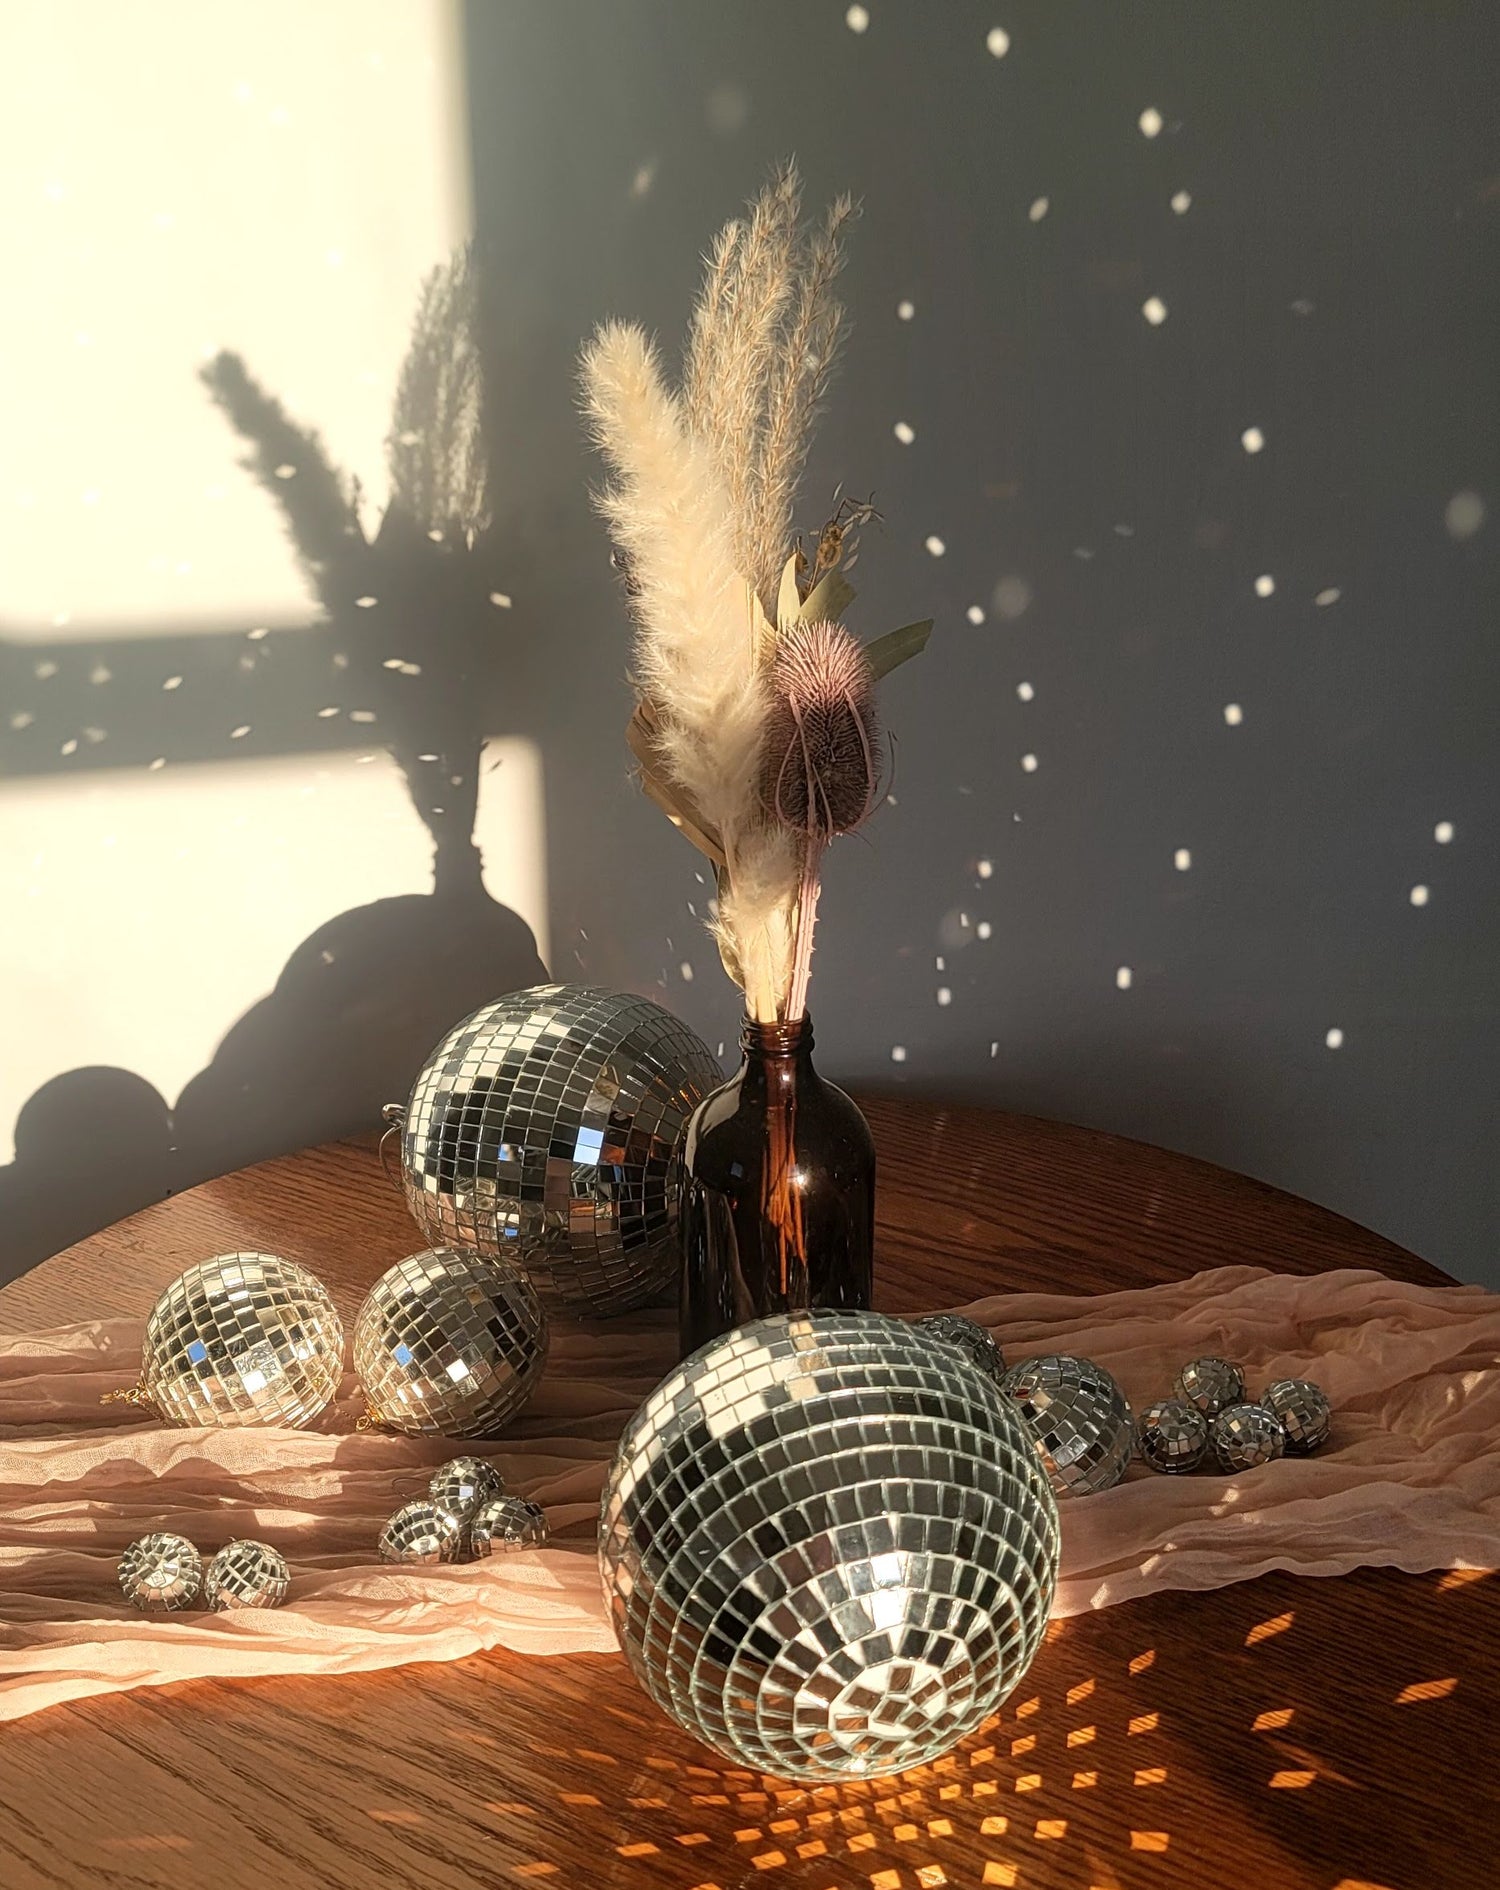 Collection of secondhand disco balls available for rent - ranging in size from 1in to 16in. Large and small disco ball collections available for rent in Winnipeg!